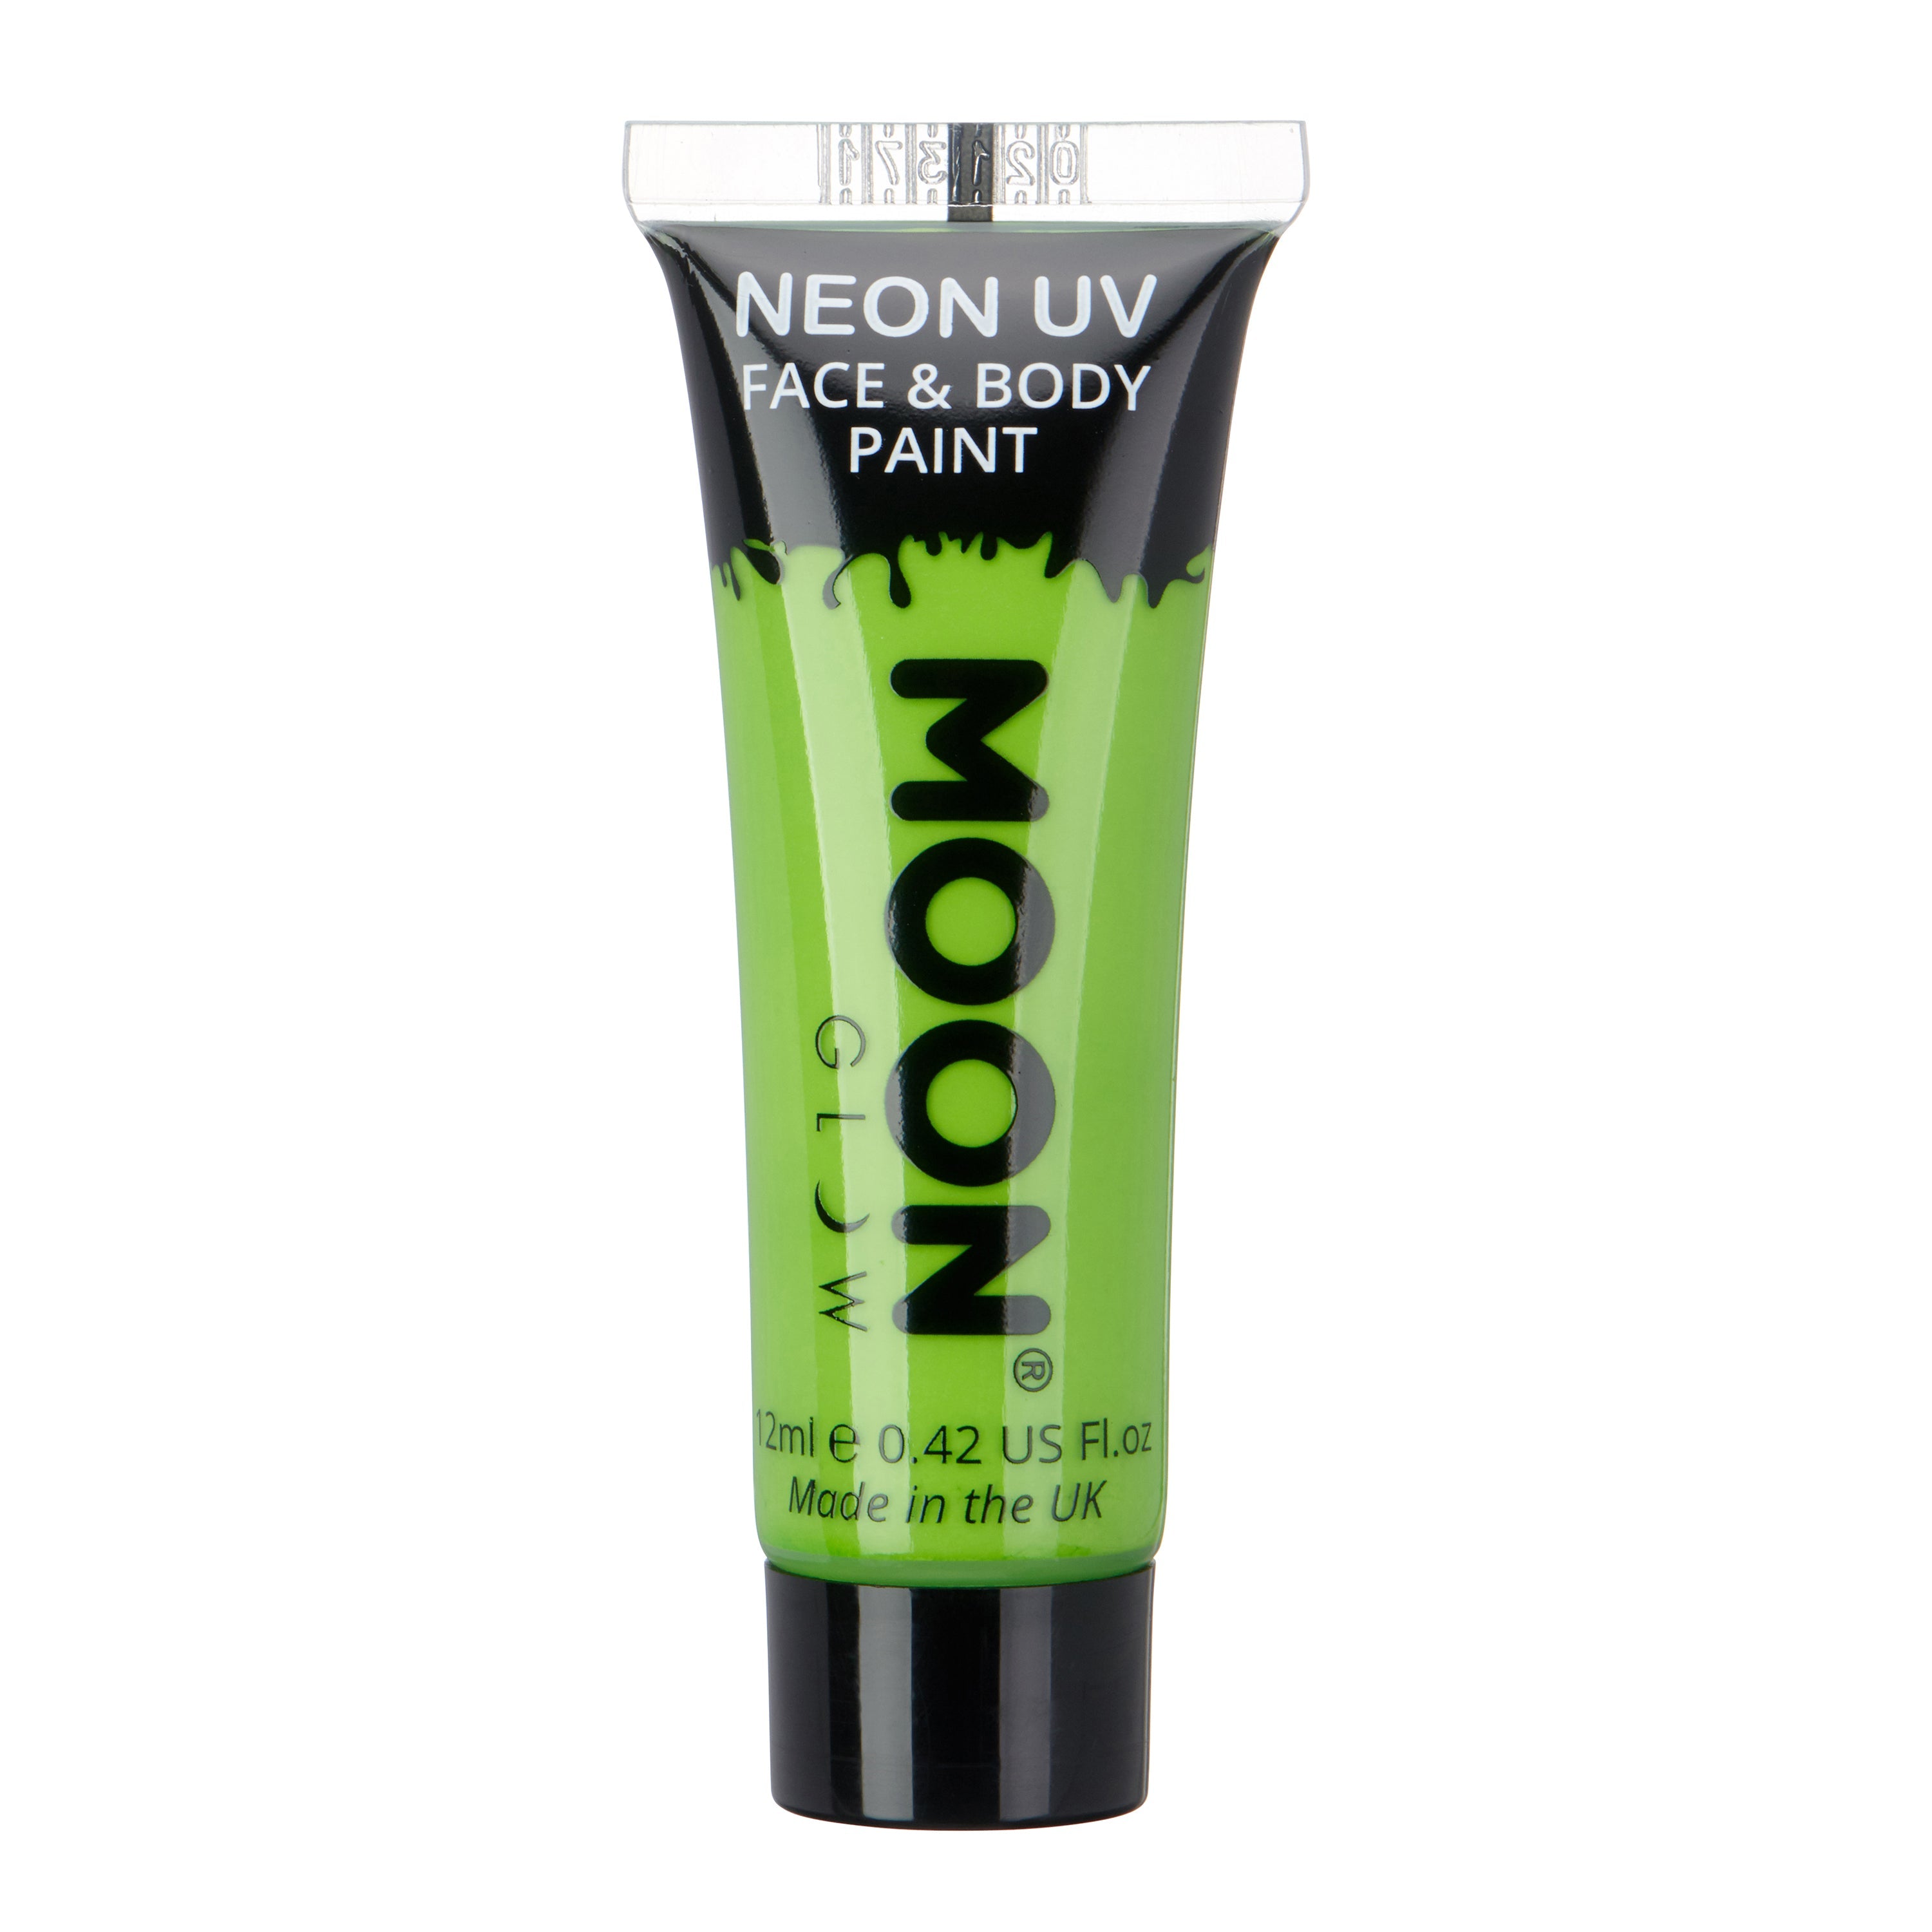 Intense Green - Neon UV Glow Blacklight Face & Body Paint Makeup, 12mL. Cosmetically certified, FDA & Health Canada compliant, cruelty free and vegan.